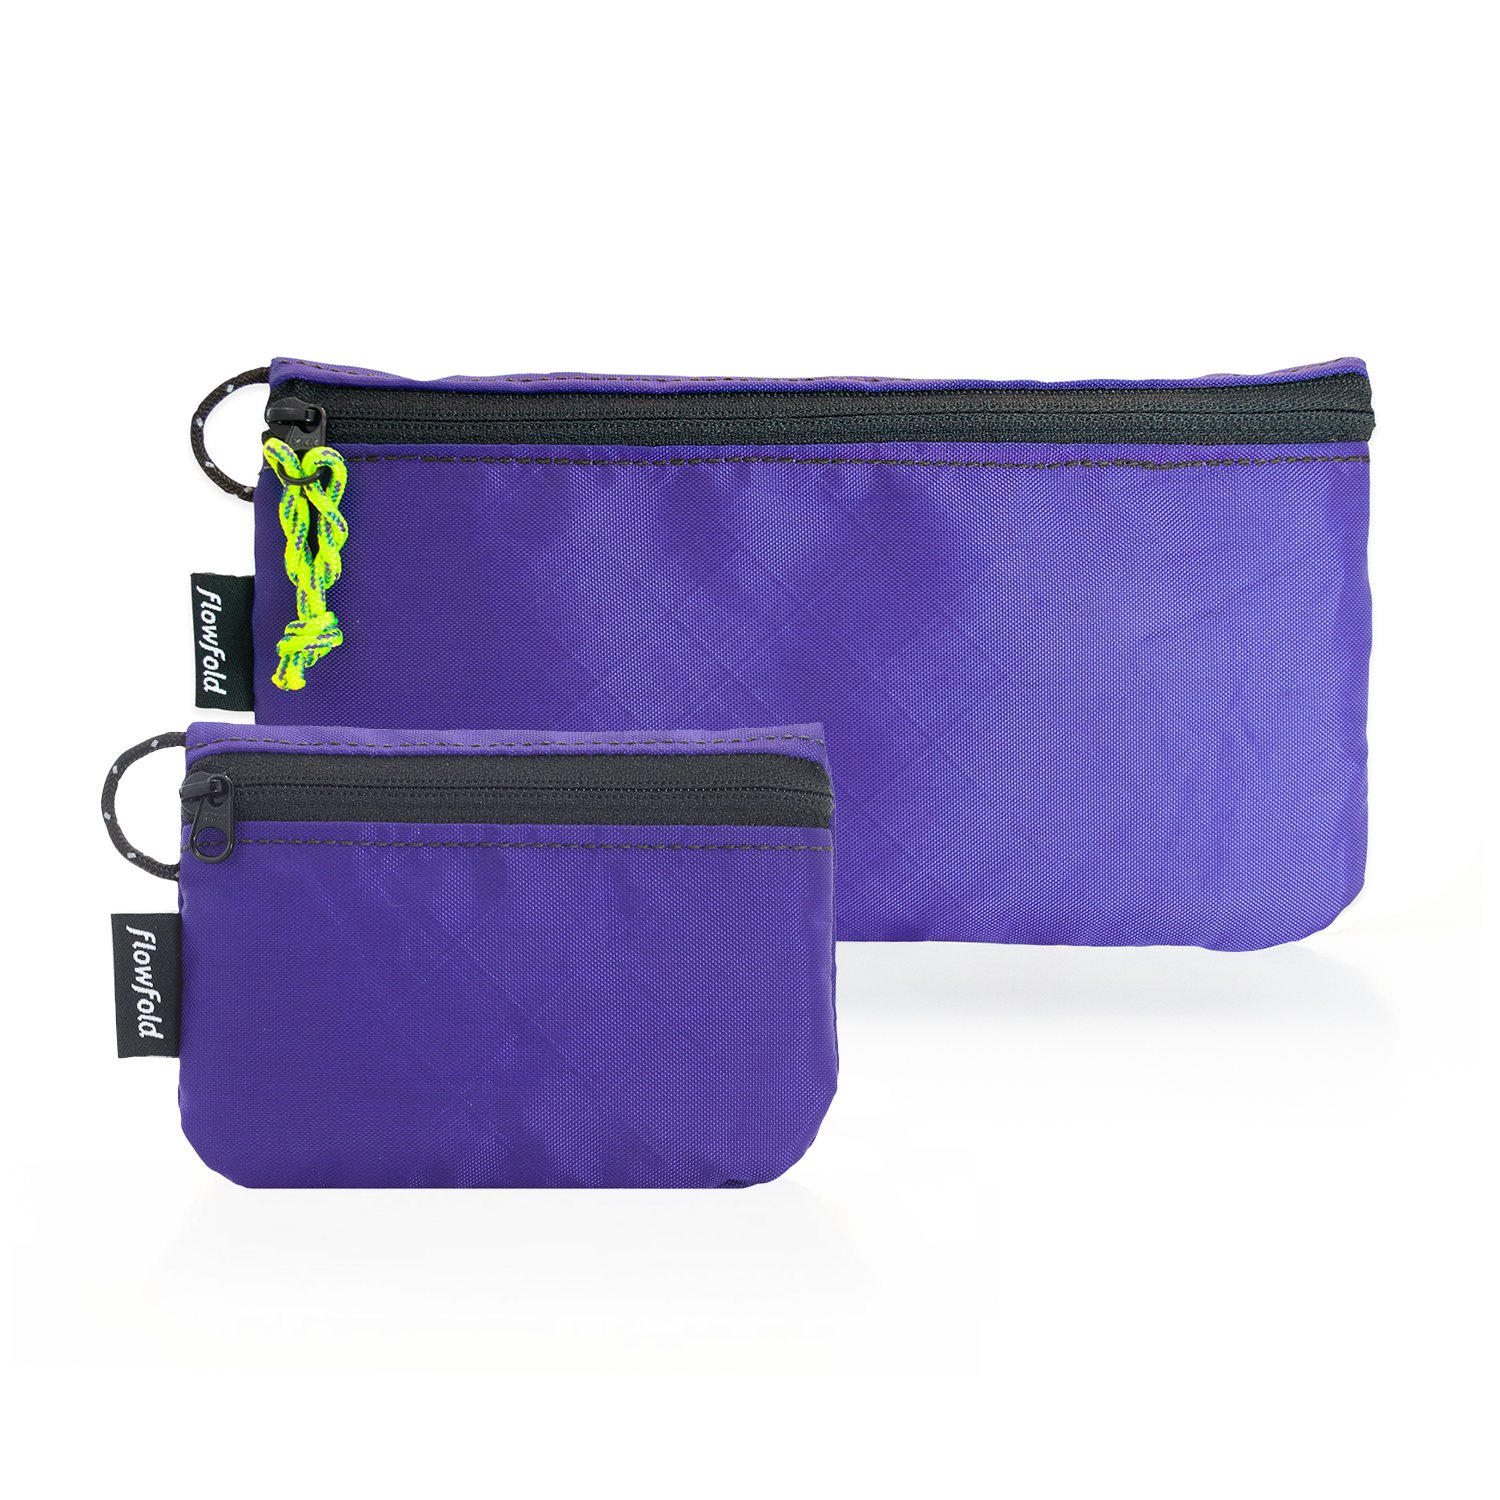 Flowfold Camden Kit: Creator Large Zippered Women's Wallet For Cash, Cards, and Phone + Essentialist Zipper Pouch, Recycled Olive